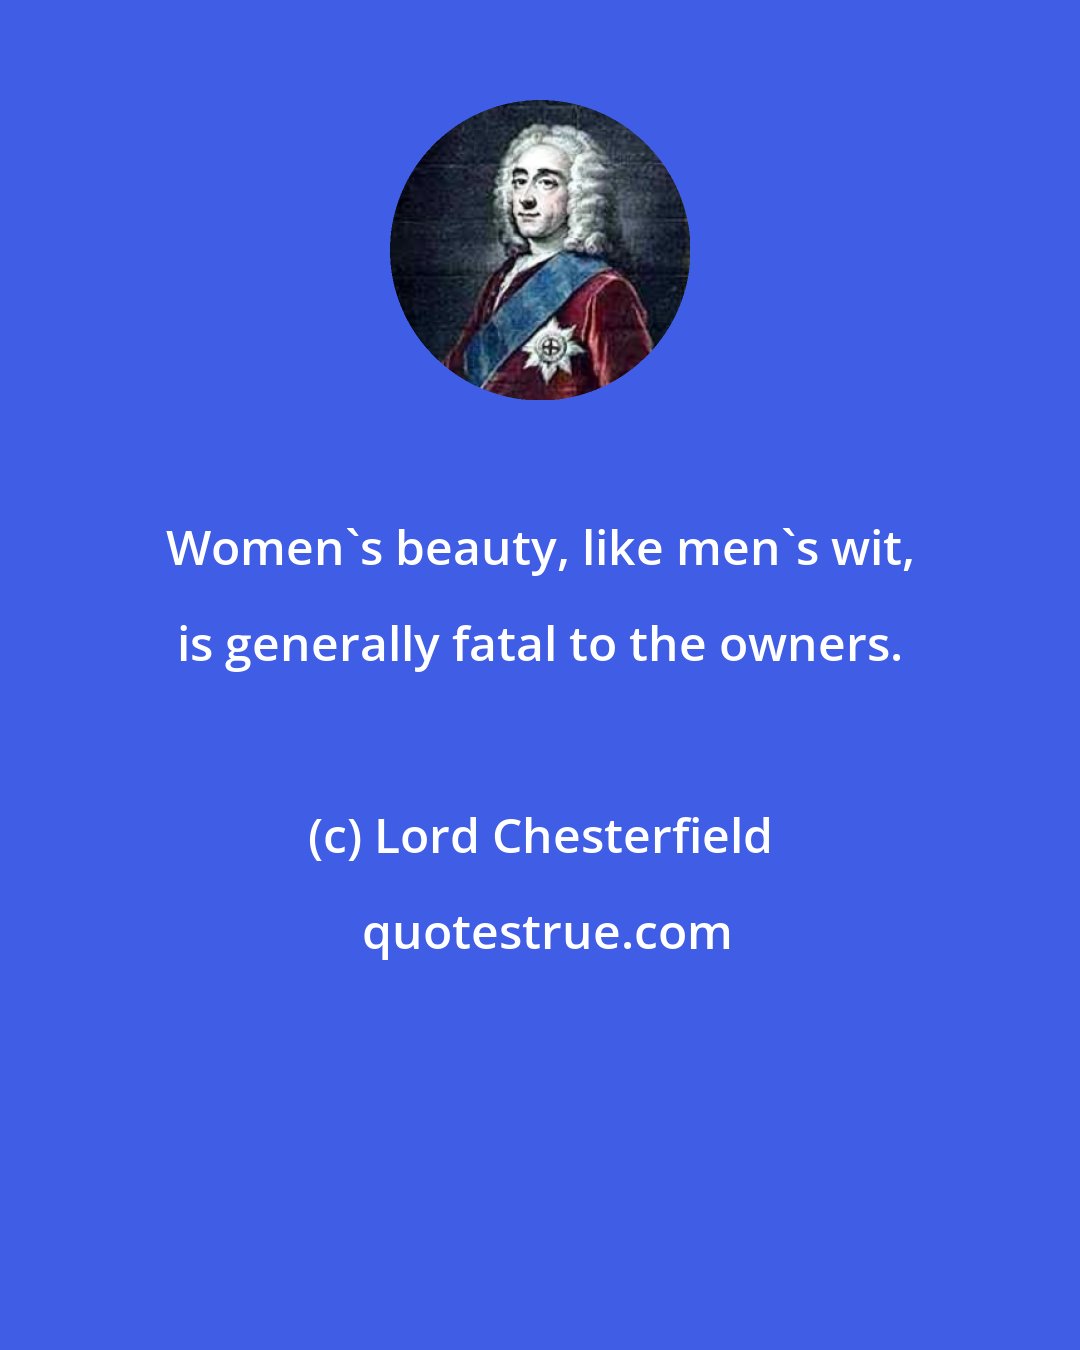 Lord Chesterfield: Women's beauty, like men's wit, is generally fatal to the owners.